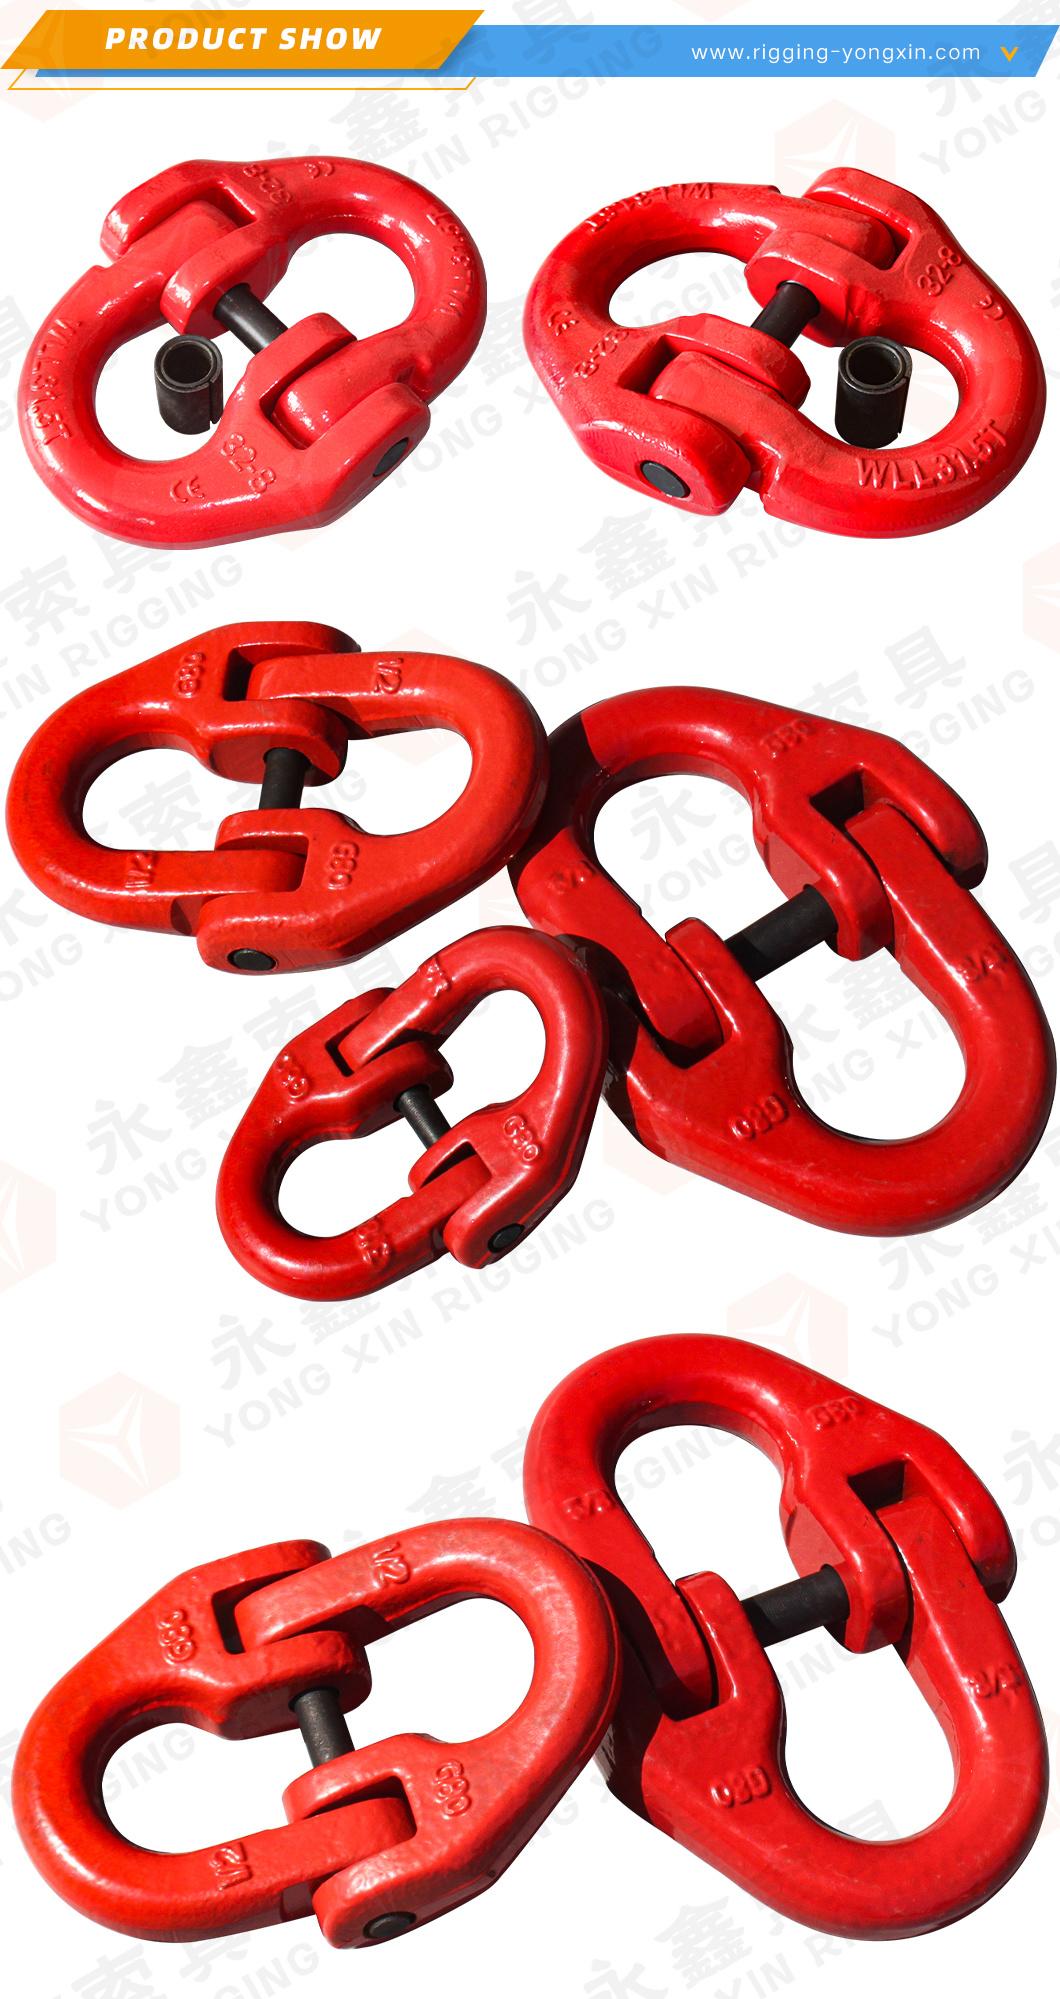 Rigging Hardware of Drop Forged Us a-336 Hammerlock Coupling Red Color Connecting Link